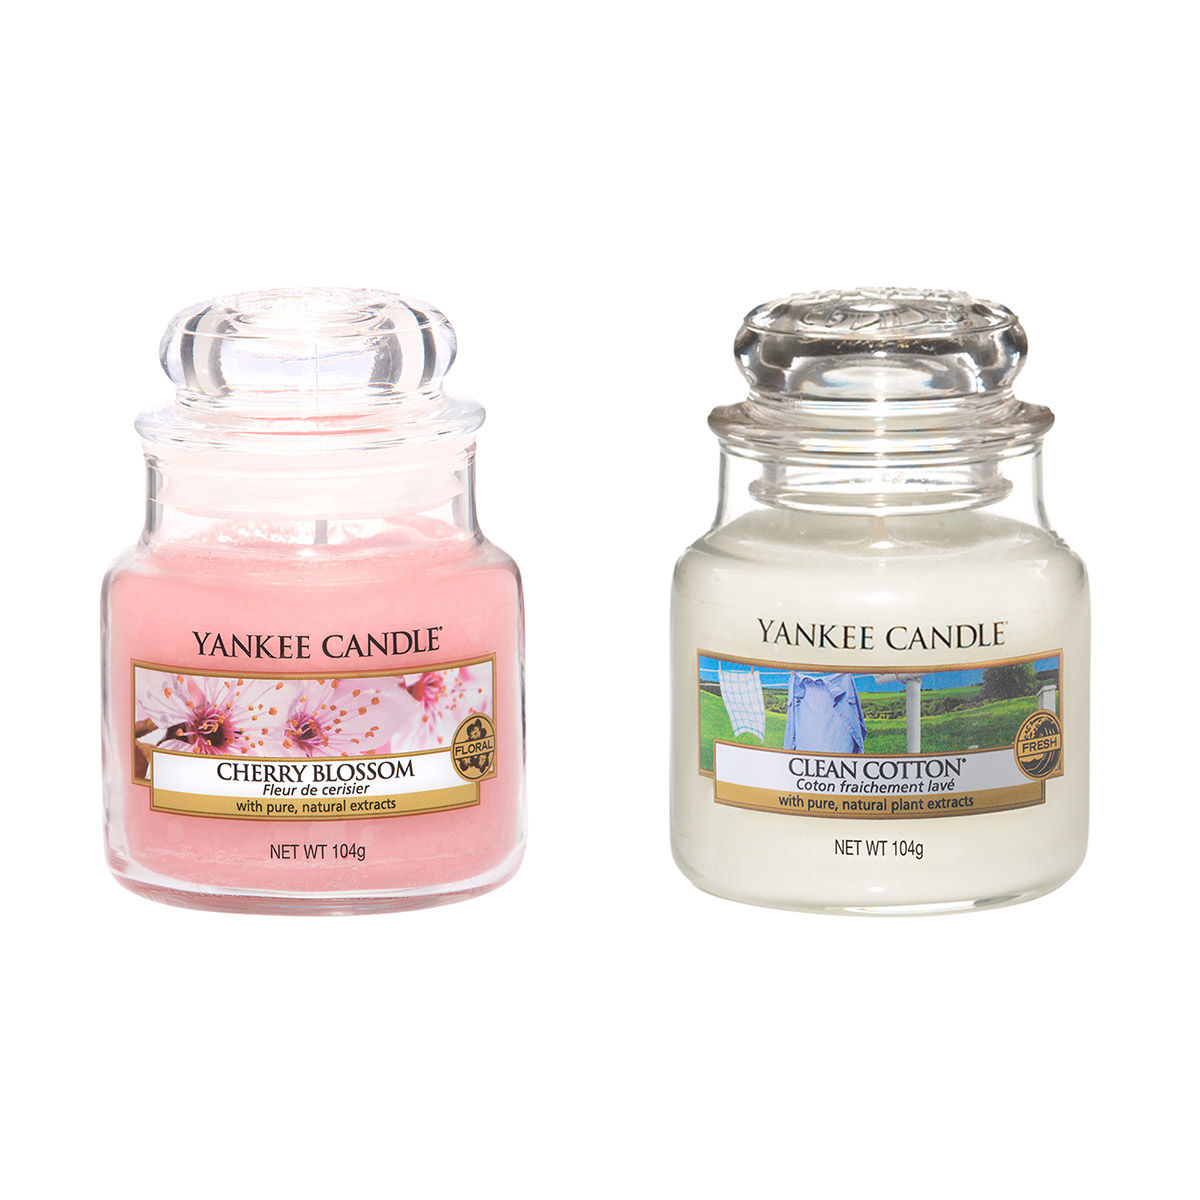 Buy Yankee Candle Classic Jar Scented Candles - Pack of 2 - Cherry